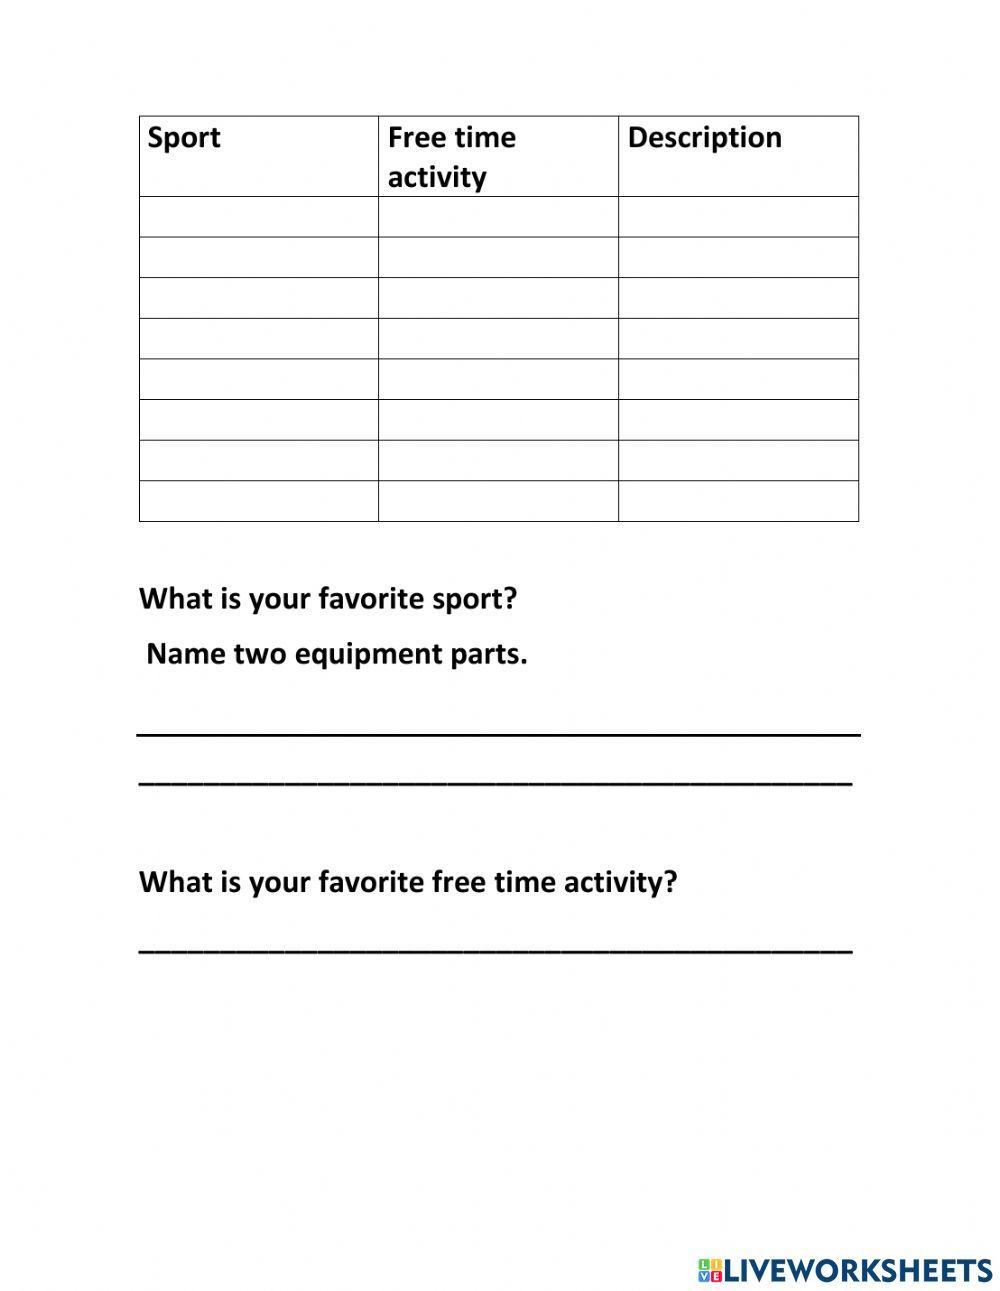 Sports and free time activities test